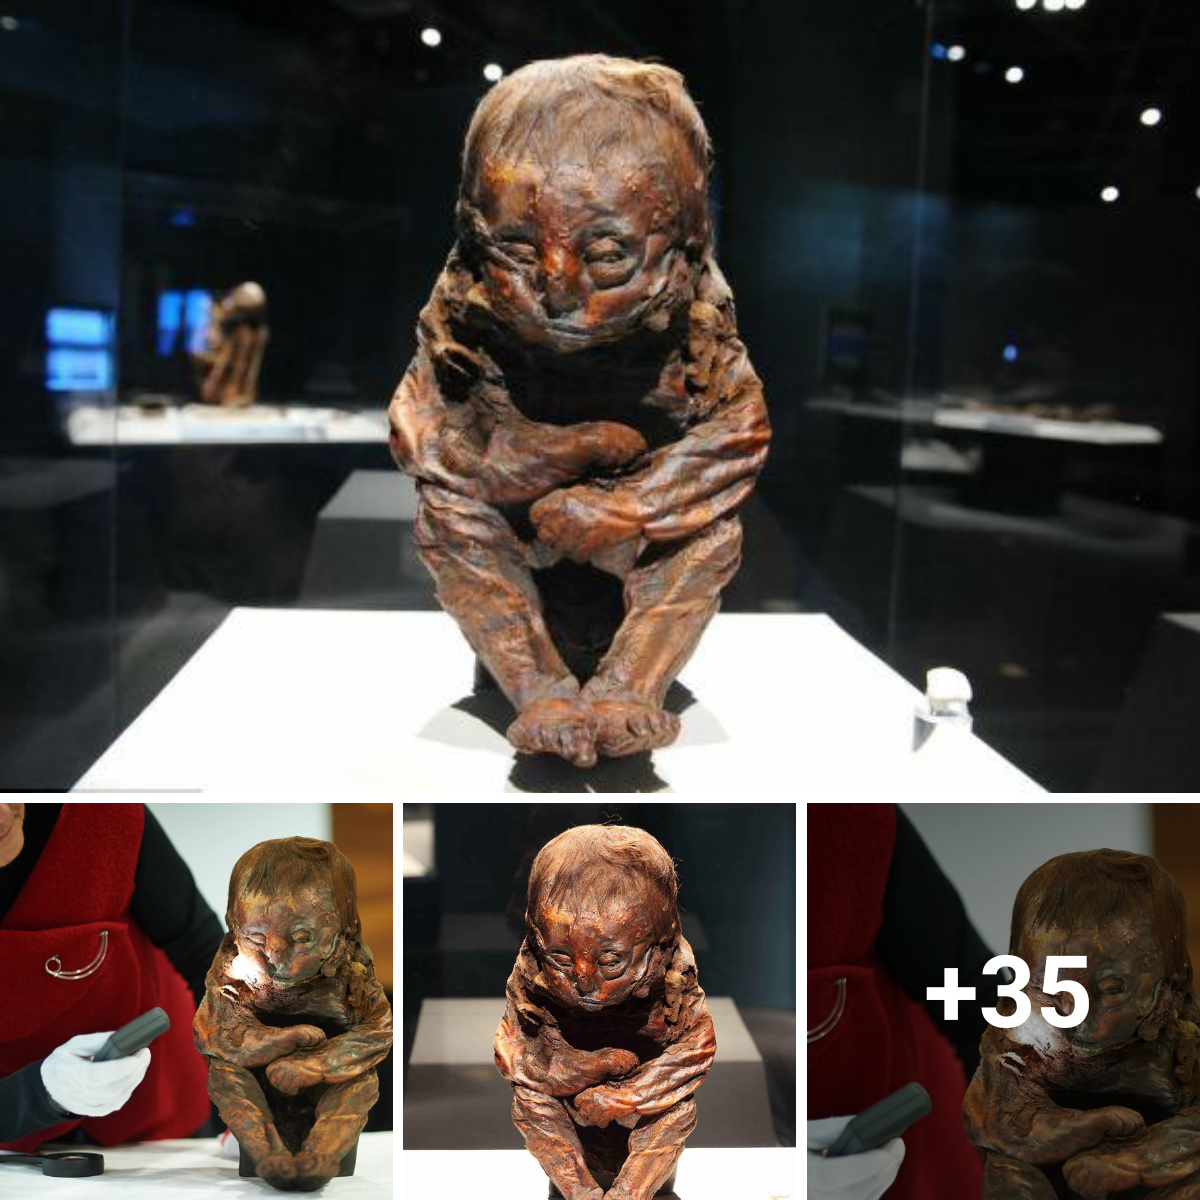 The Detmold Child: A 6,500-year-old Peruvian child mummy with an amulet buried around its neck and wrapped in linen